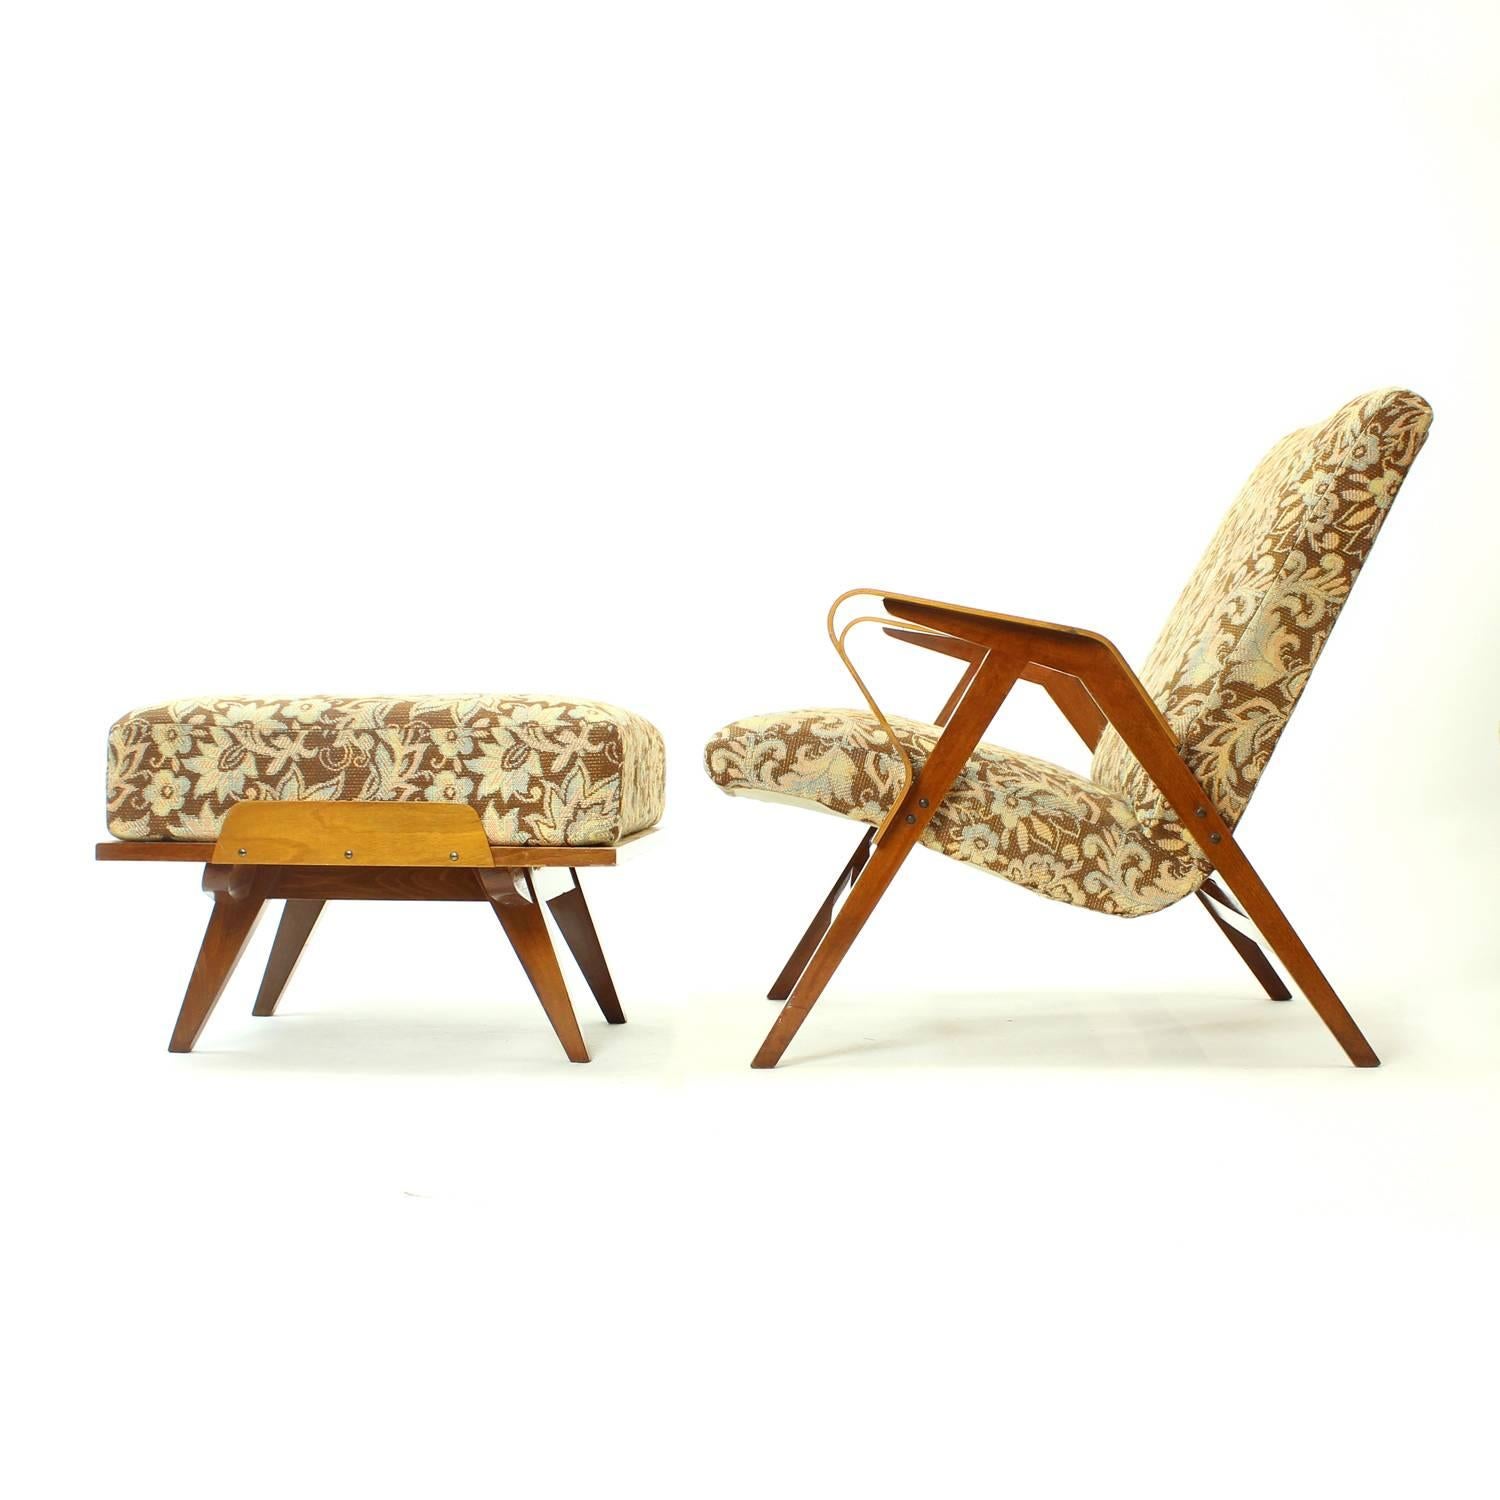 Typical midcentury design of the armchair produced by Tatra. A rare set with an original ottoman, which is big enough to be used as a sidetable or an extra chair. The wooden construction of the chair and ottoman shows some typical features of the